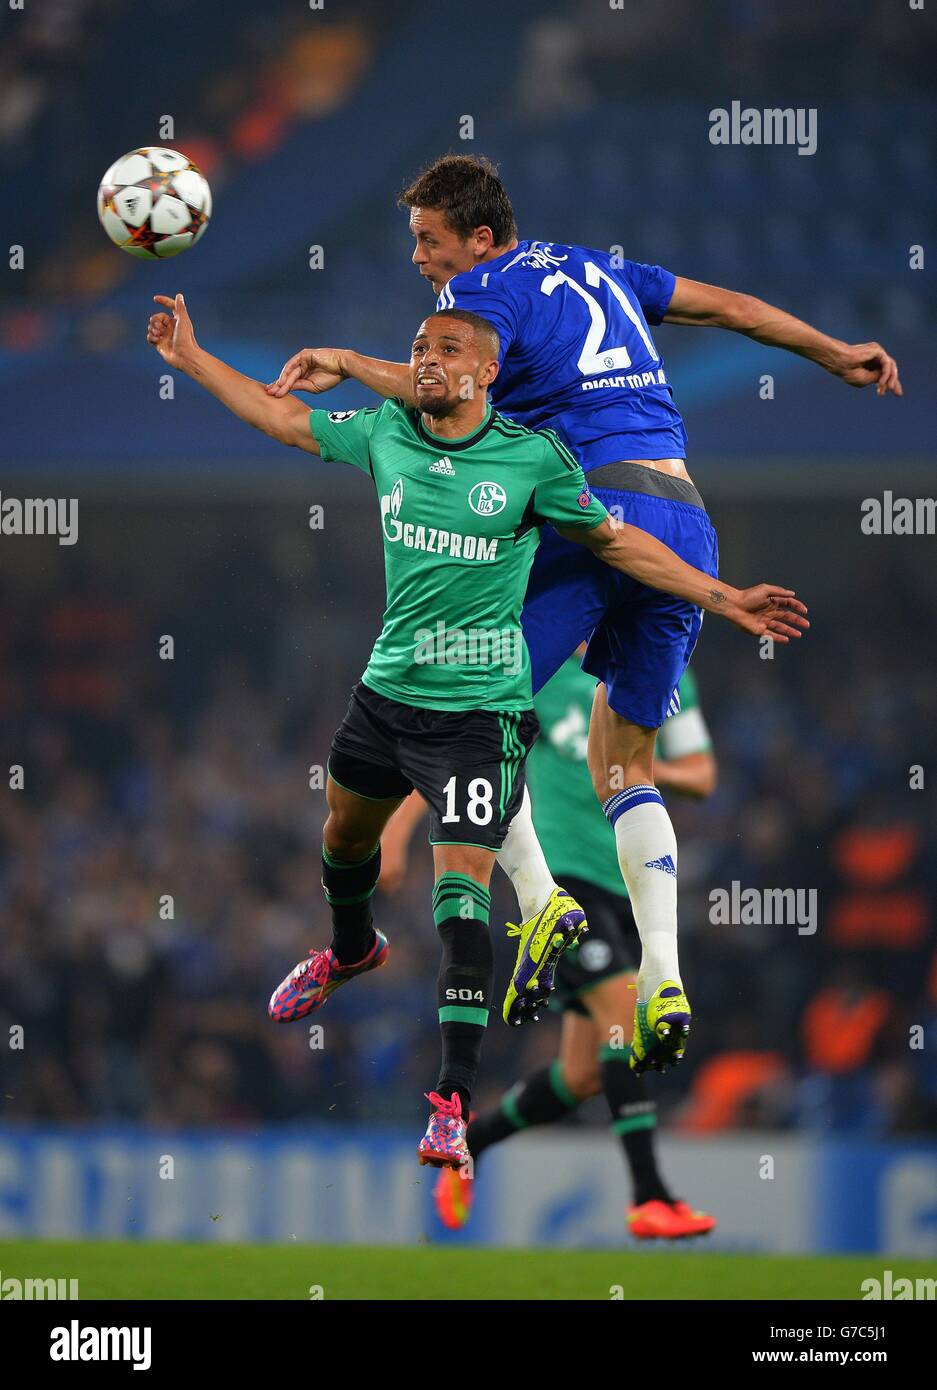 Chelsea's Nemenja Matic (right) wins the ball in the air from FC Schalke's Sidney Sam during the UEFA Champions League, Group G match at Stamford Bridge, Liverpool. Stock Photo